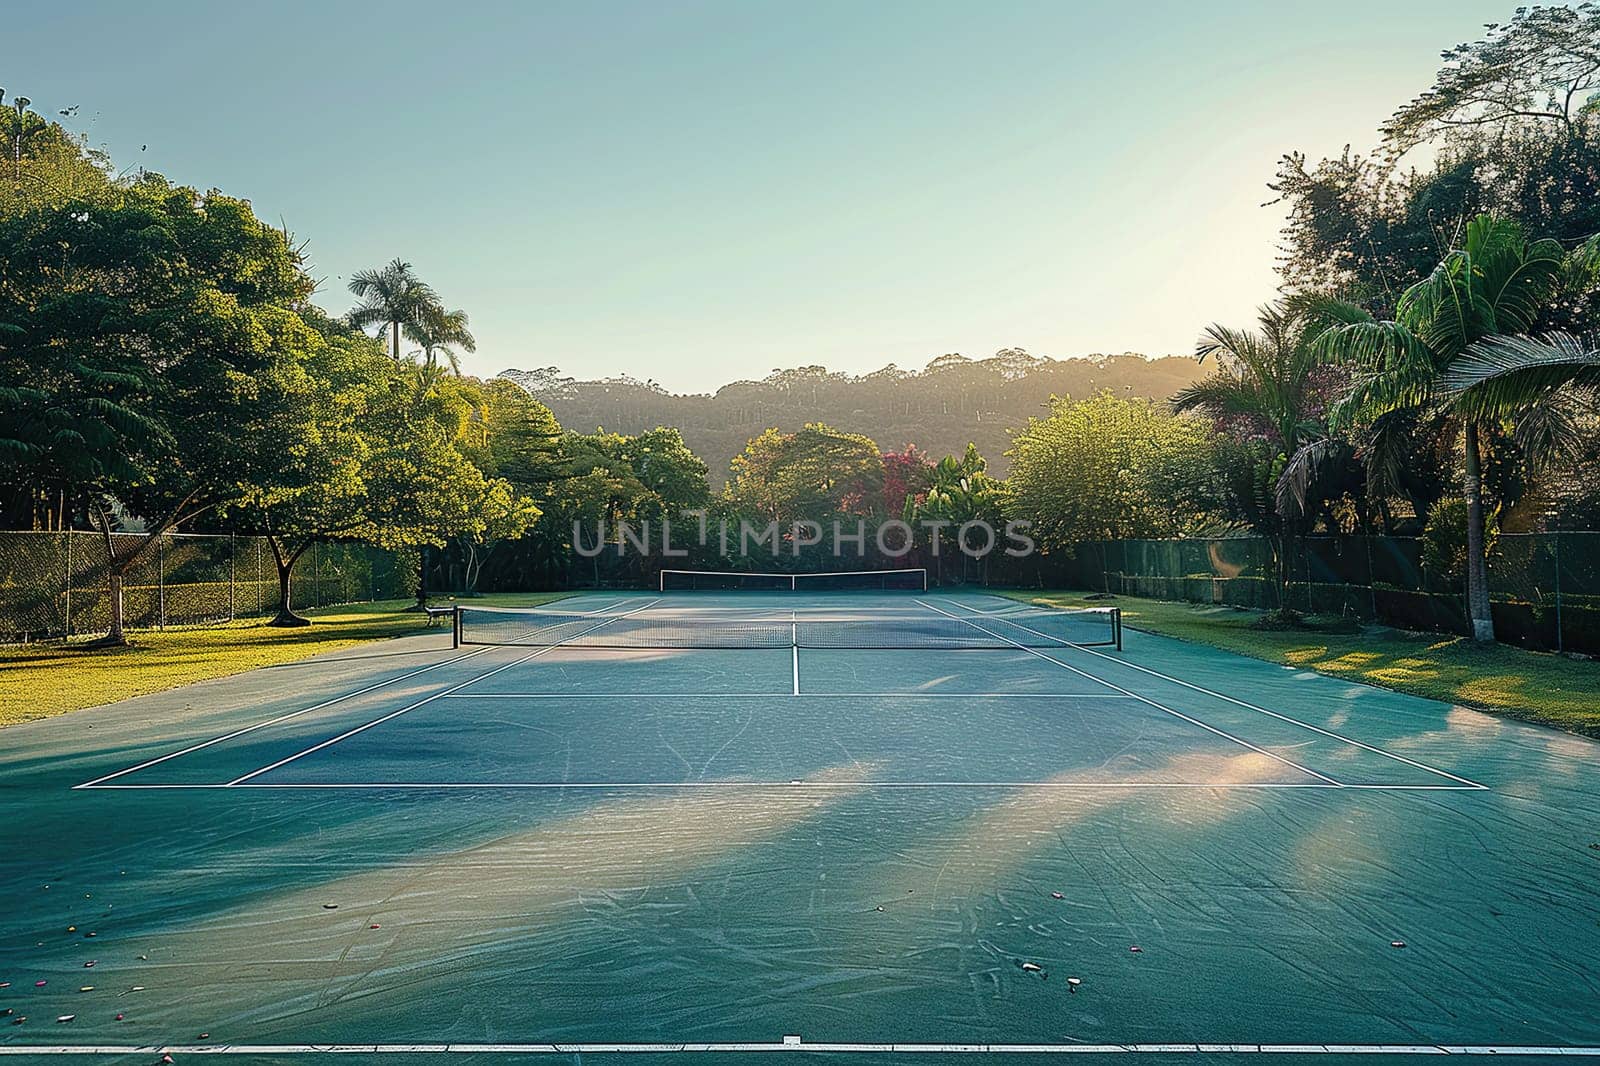 Outdoor padel tennis court. Tennis court surrounded by tropical trees on a sunny day. Generated by artificial intelligence by Vovmar